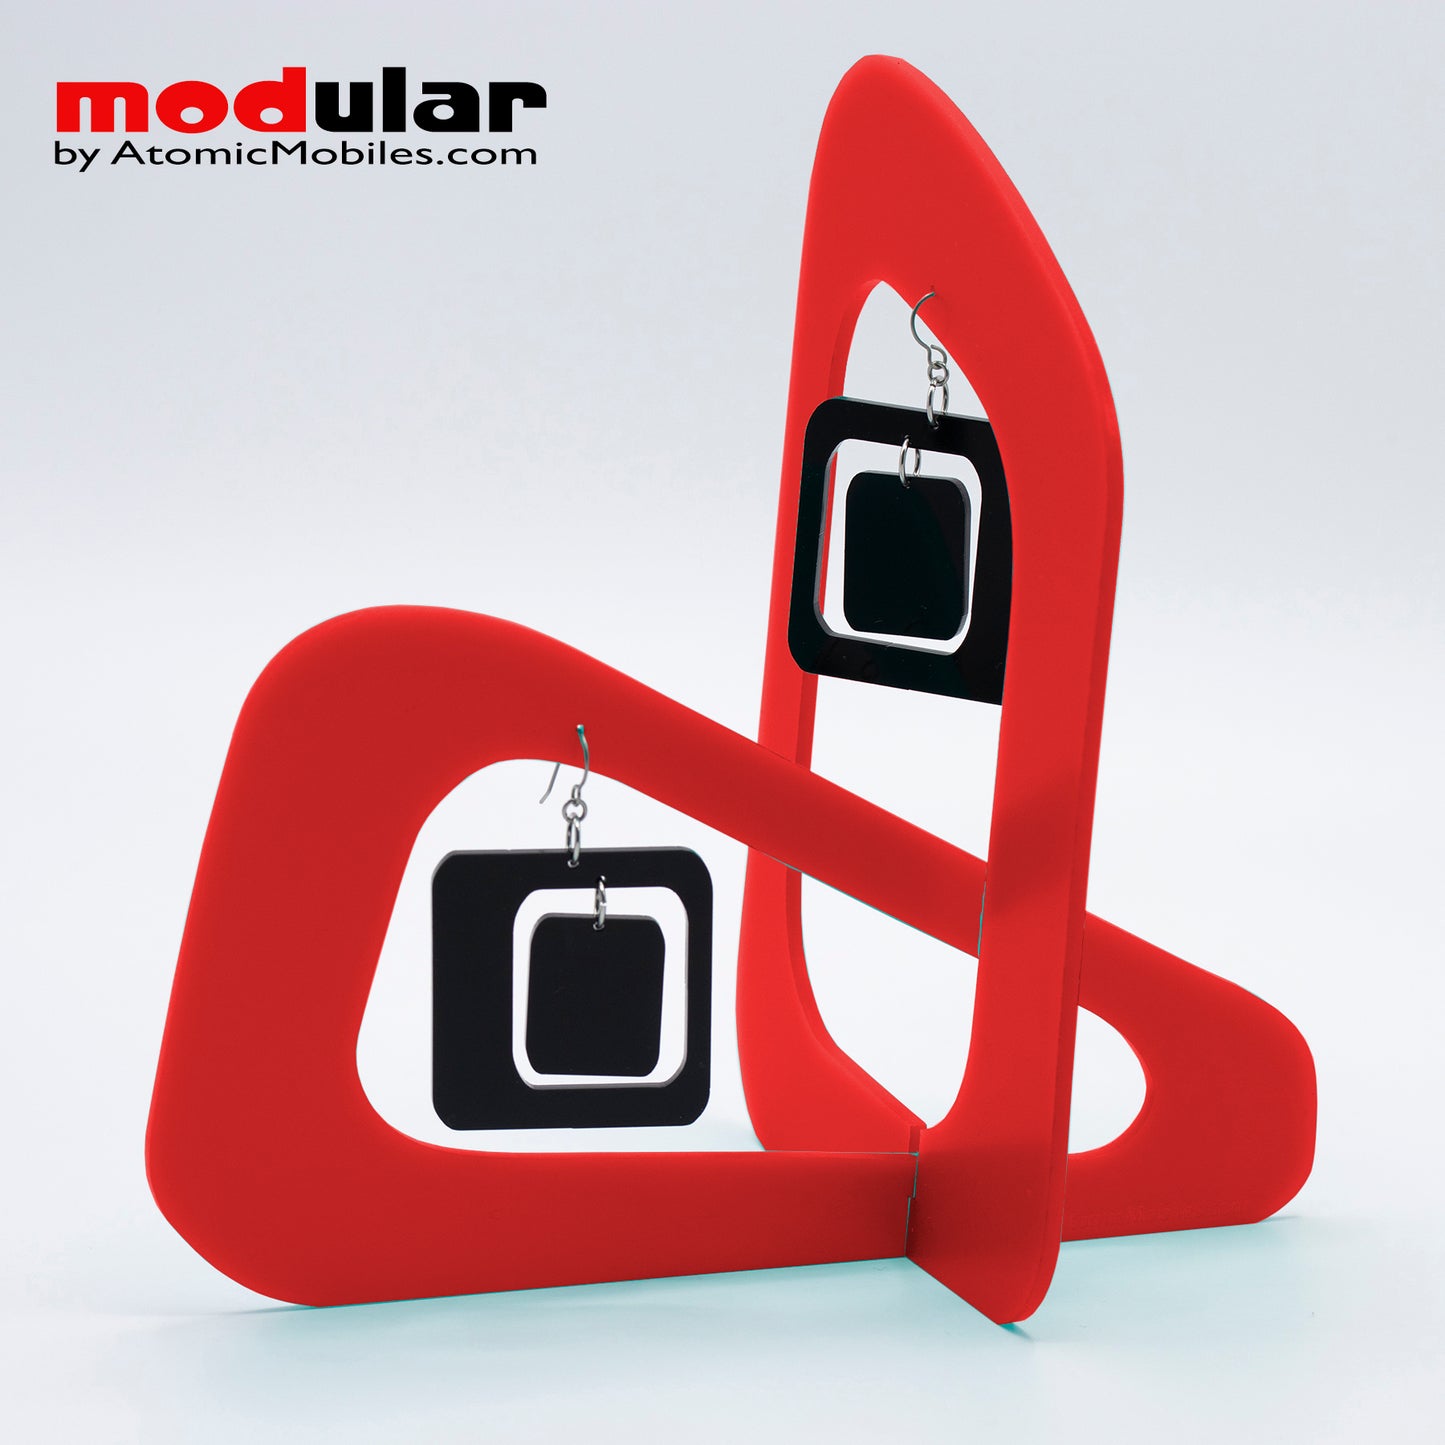 Handmade Coolsville mod style earrings and stabile kinetic modern art sculpture in Red and Black by AtomicMobiles.com